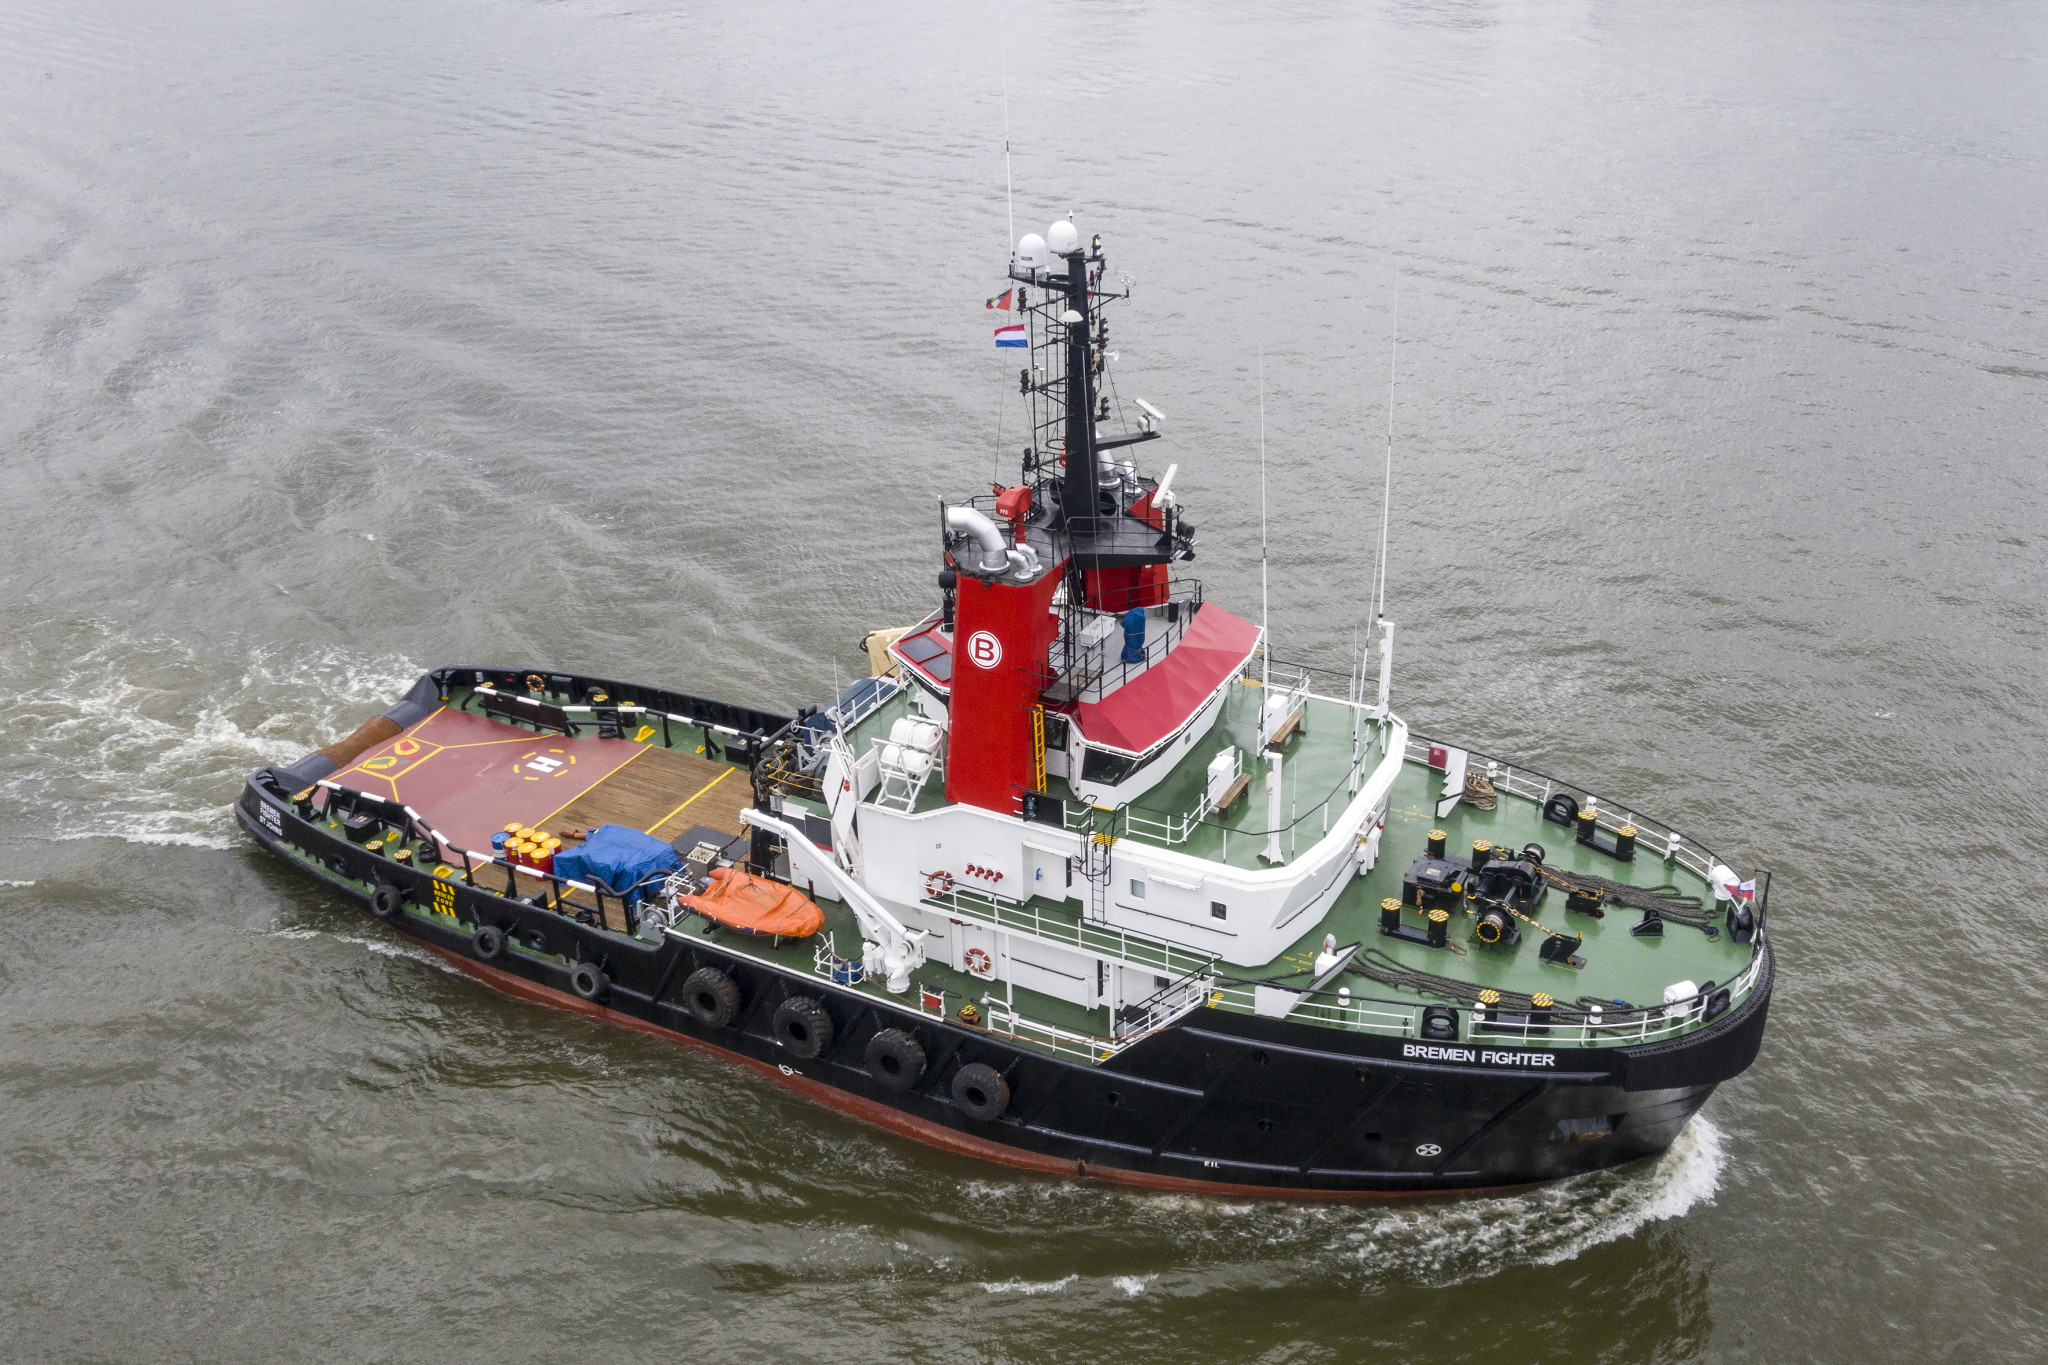 BREMEN FIGHTER, most powerful tug in the Boluda Towage fleet, now displays the corporate logo of the company